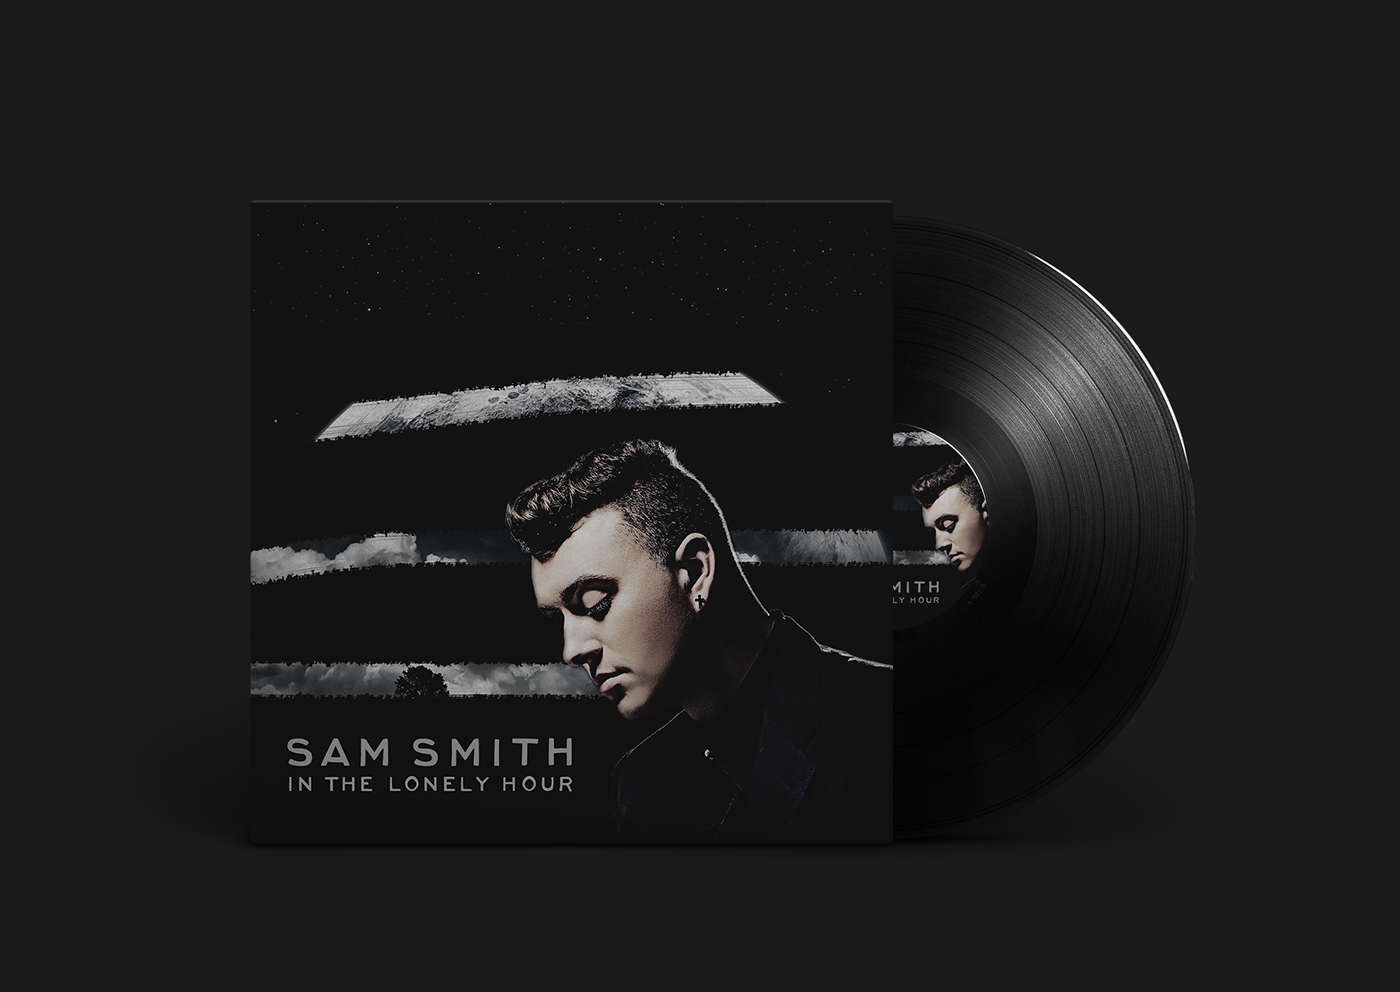 sam smith album in the lonely hour download